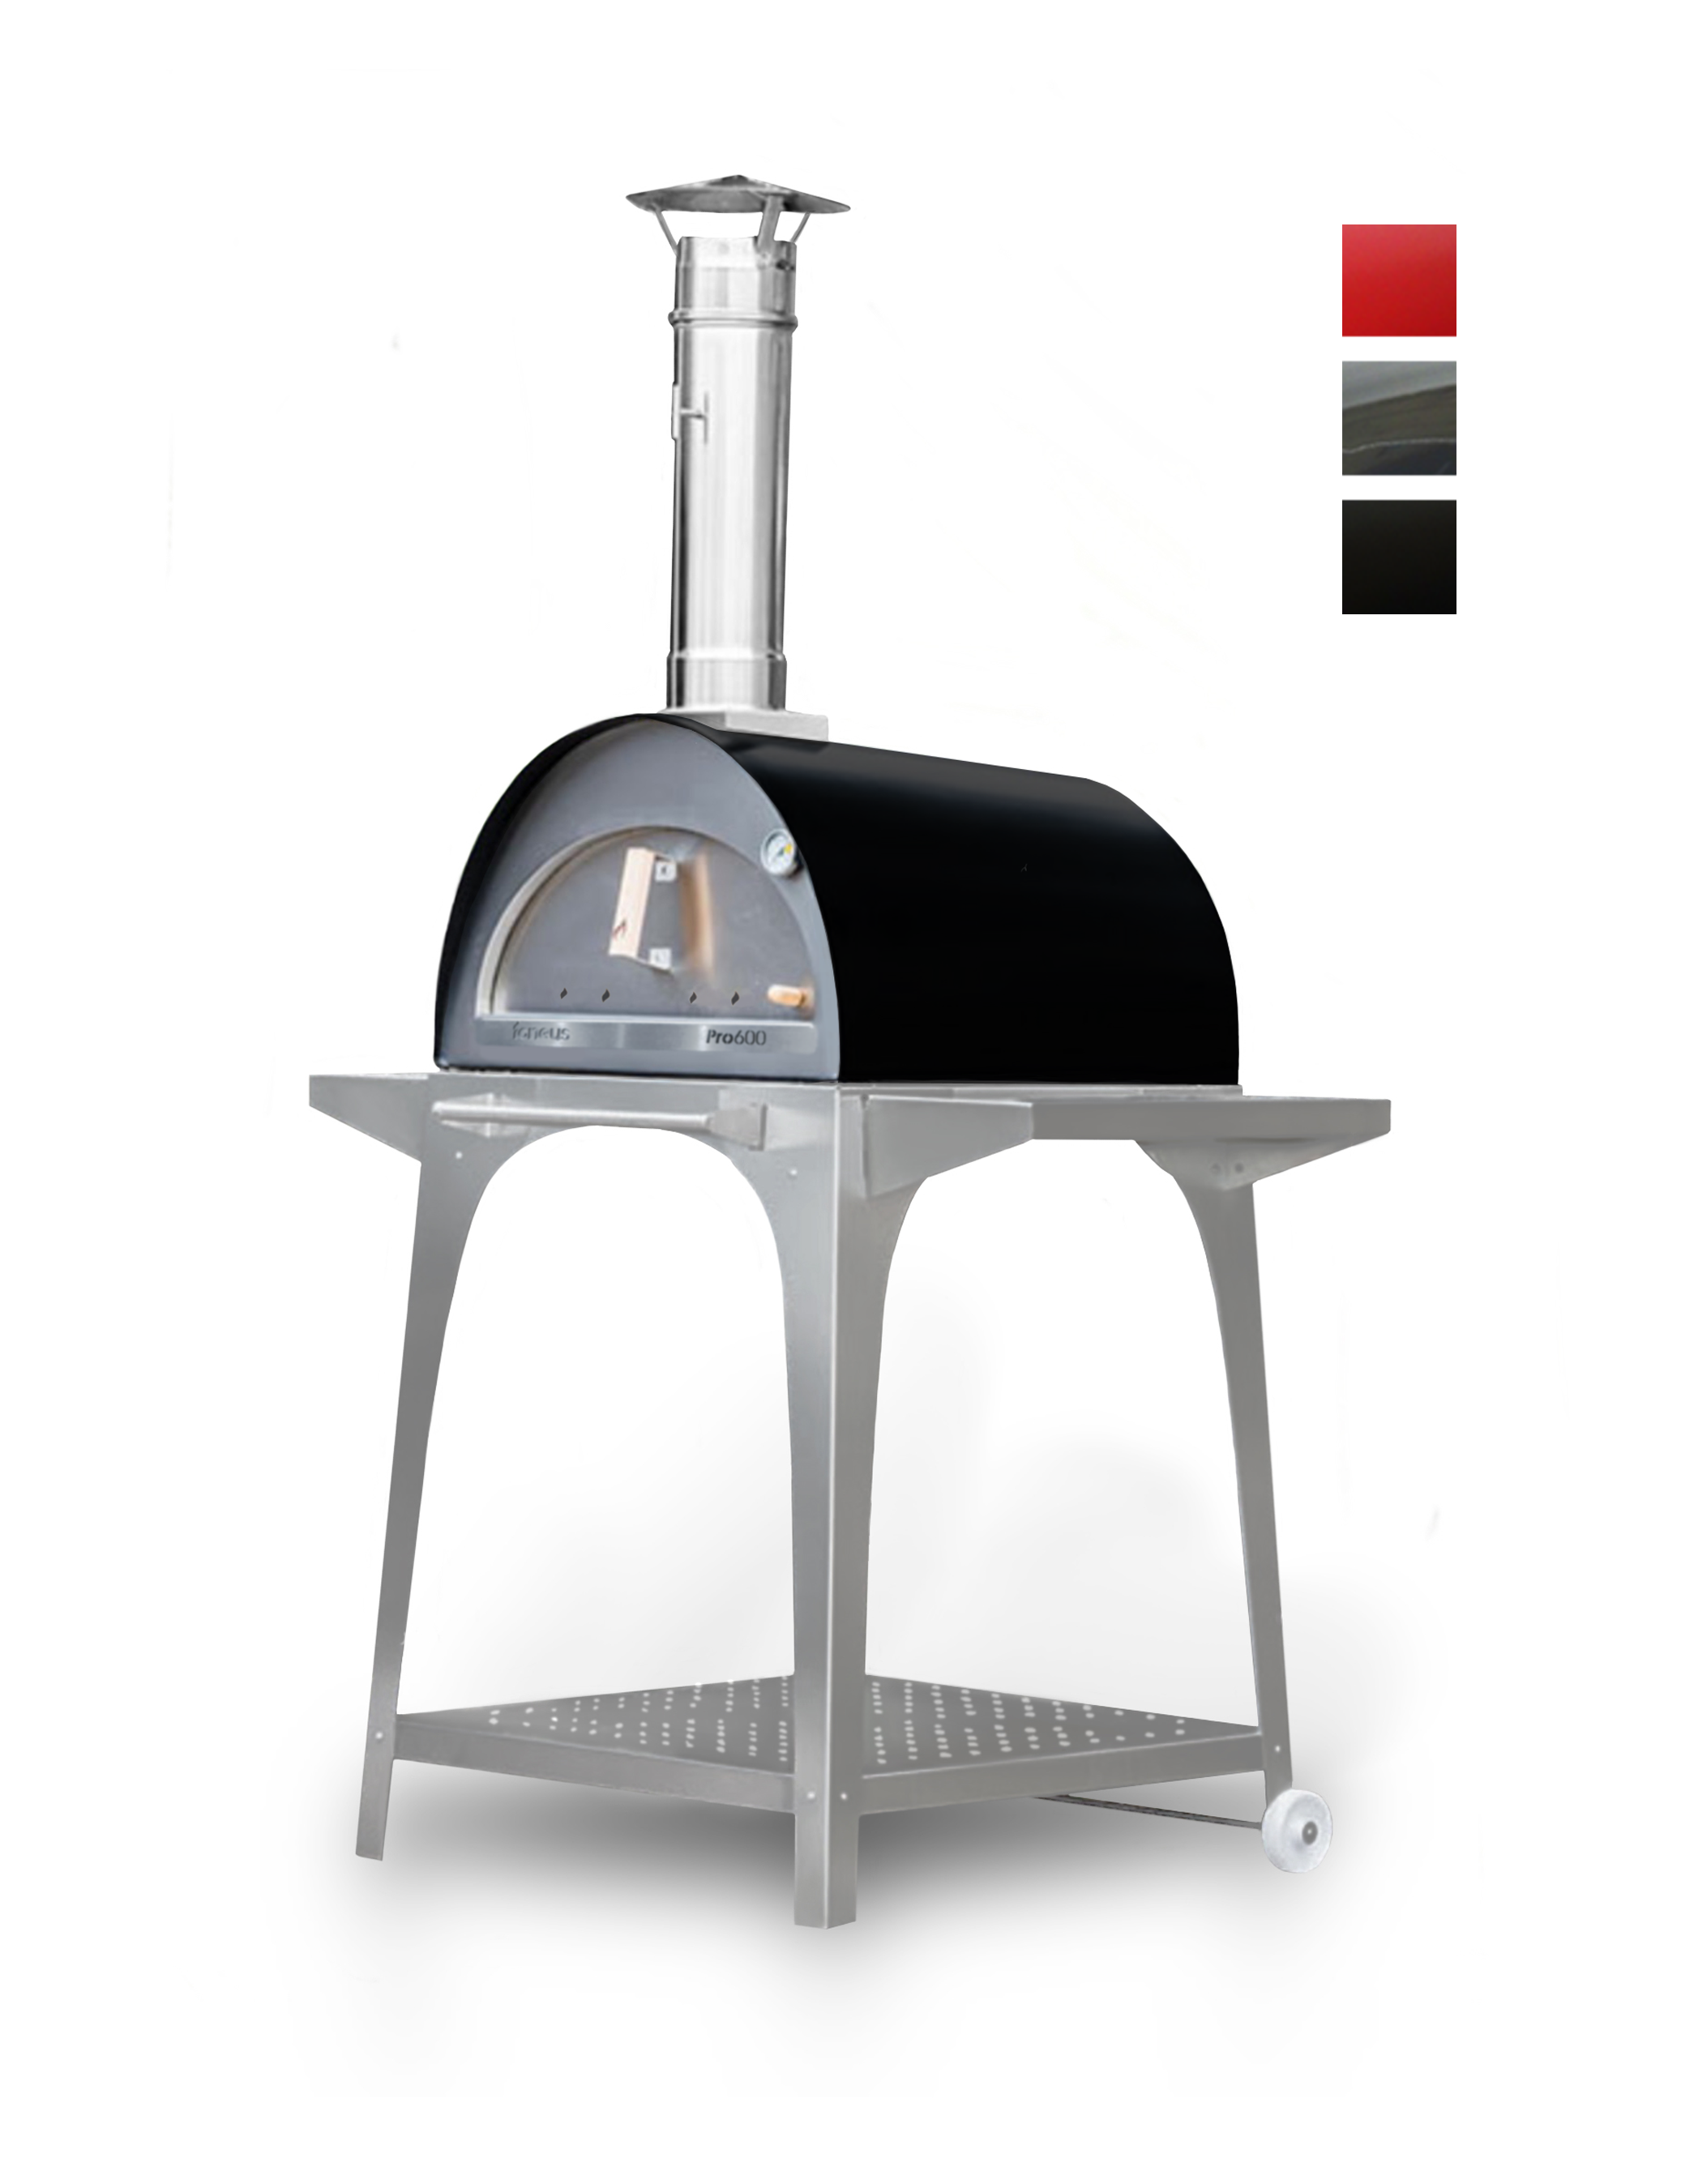 Igneus Pro 600 pizza oven with stand